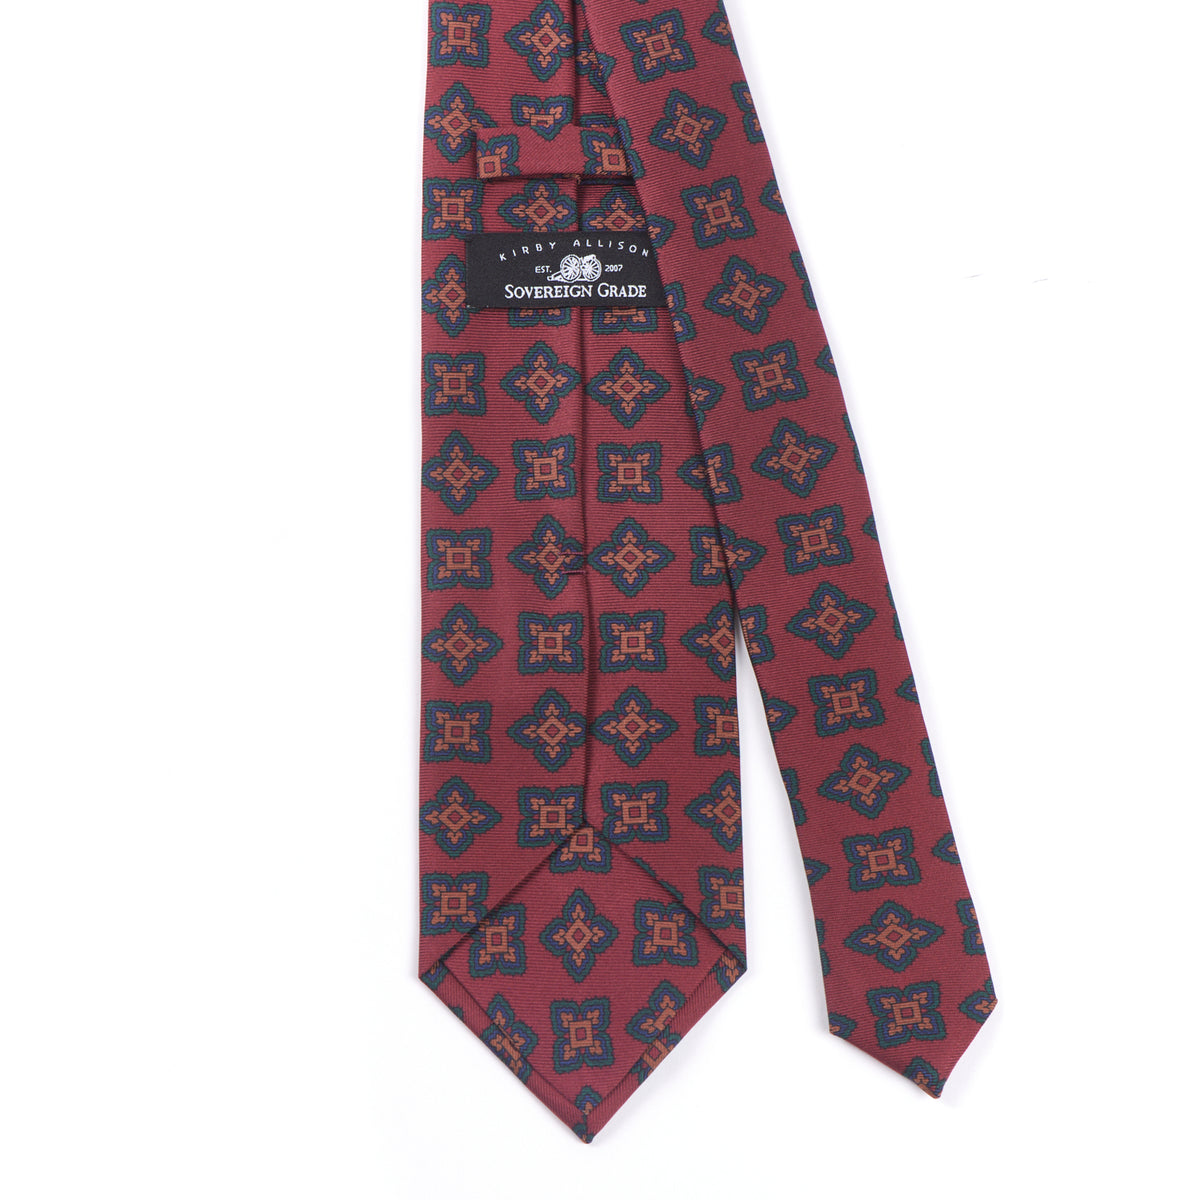 A KirbyAllison.com Sovereign Grade Rust Large Medallion Ancient Madder Tie, 150cm with a timeless black and red pattern.